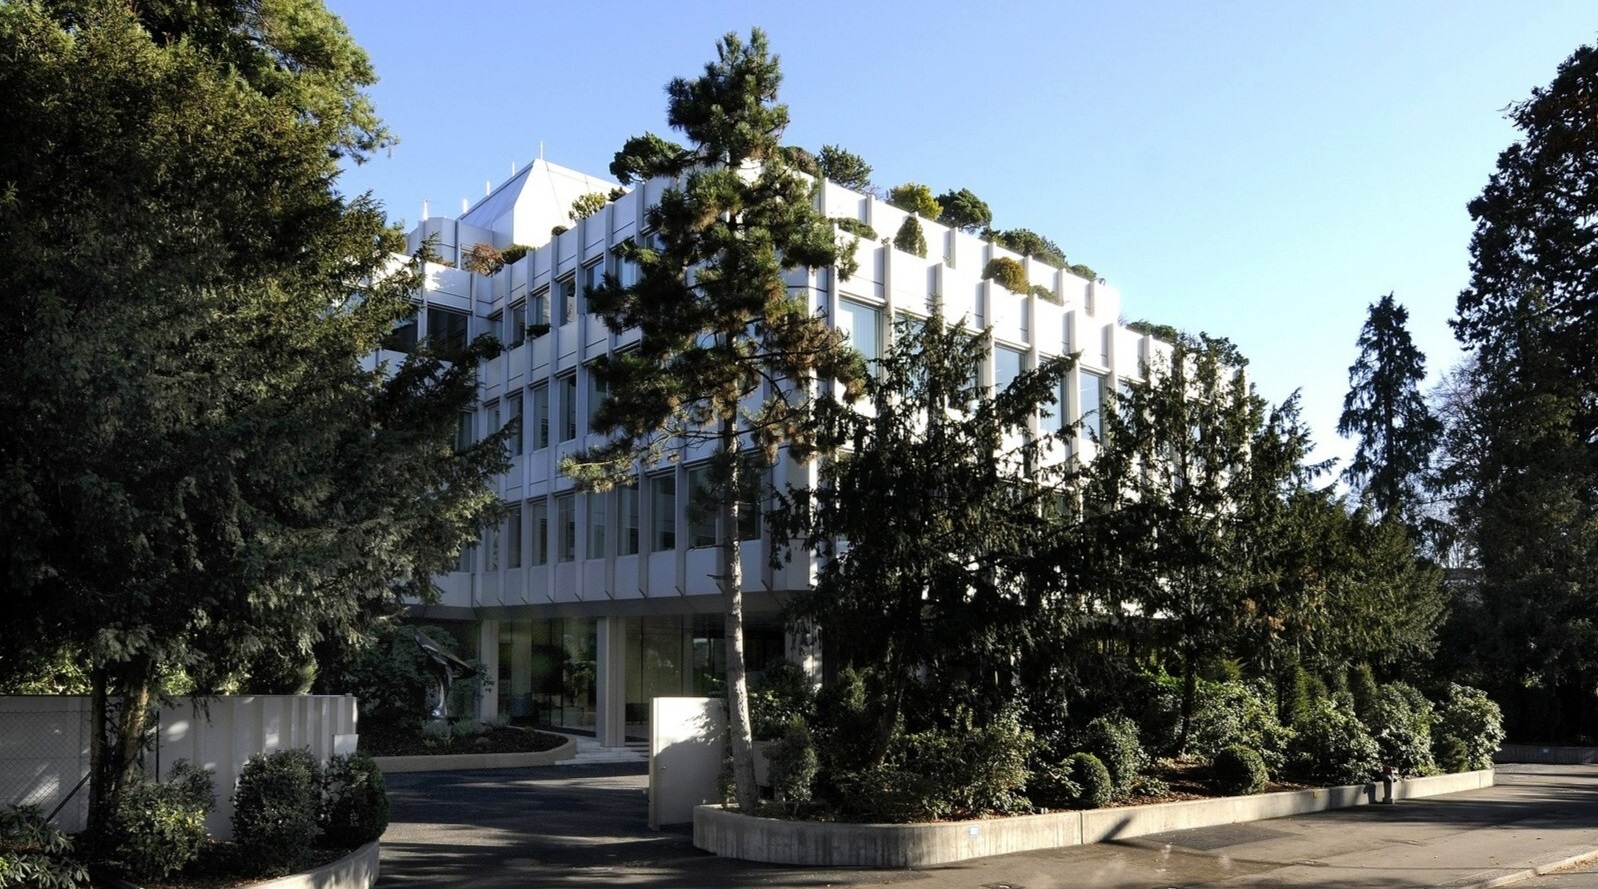 Rothschild & Co's Zurich office, a white building with trees around it